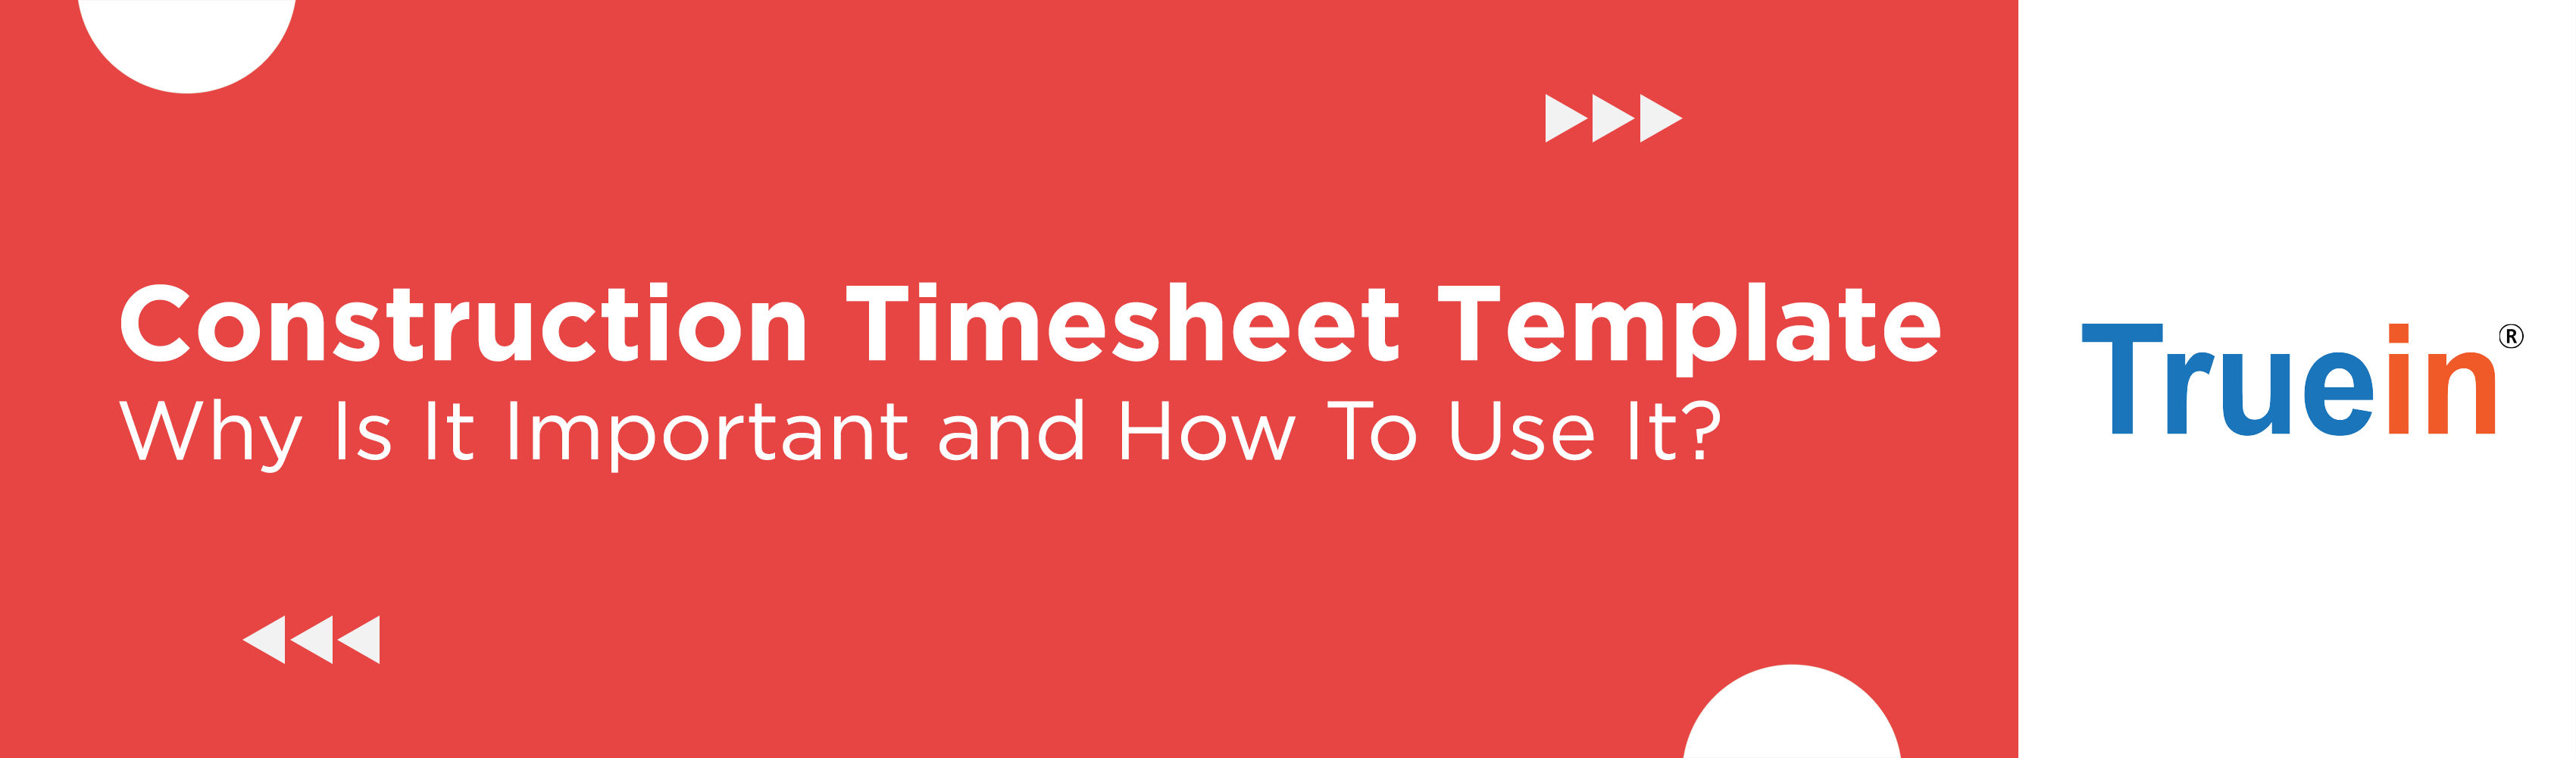 Construction Timesheet Template: Why Is It Important and How To Use It?